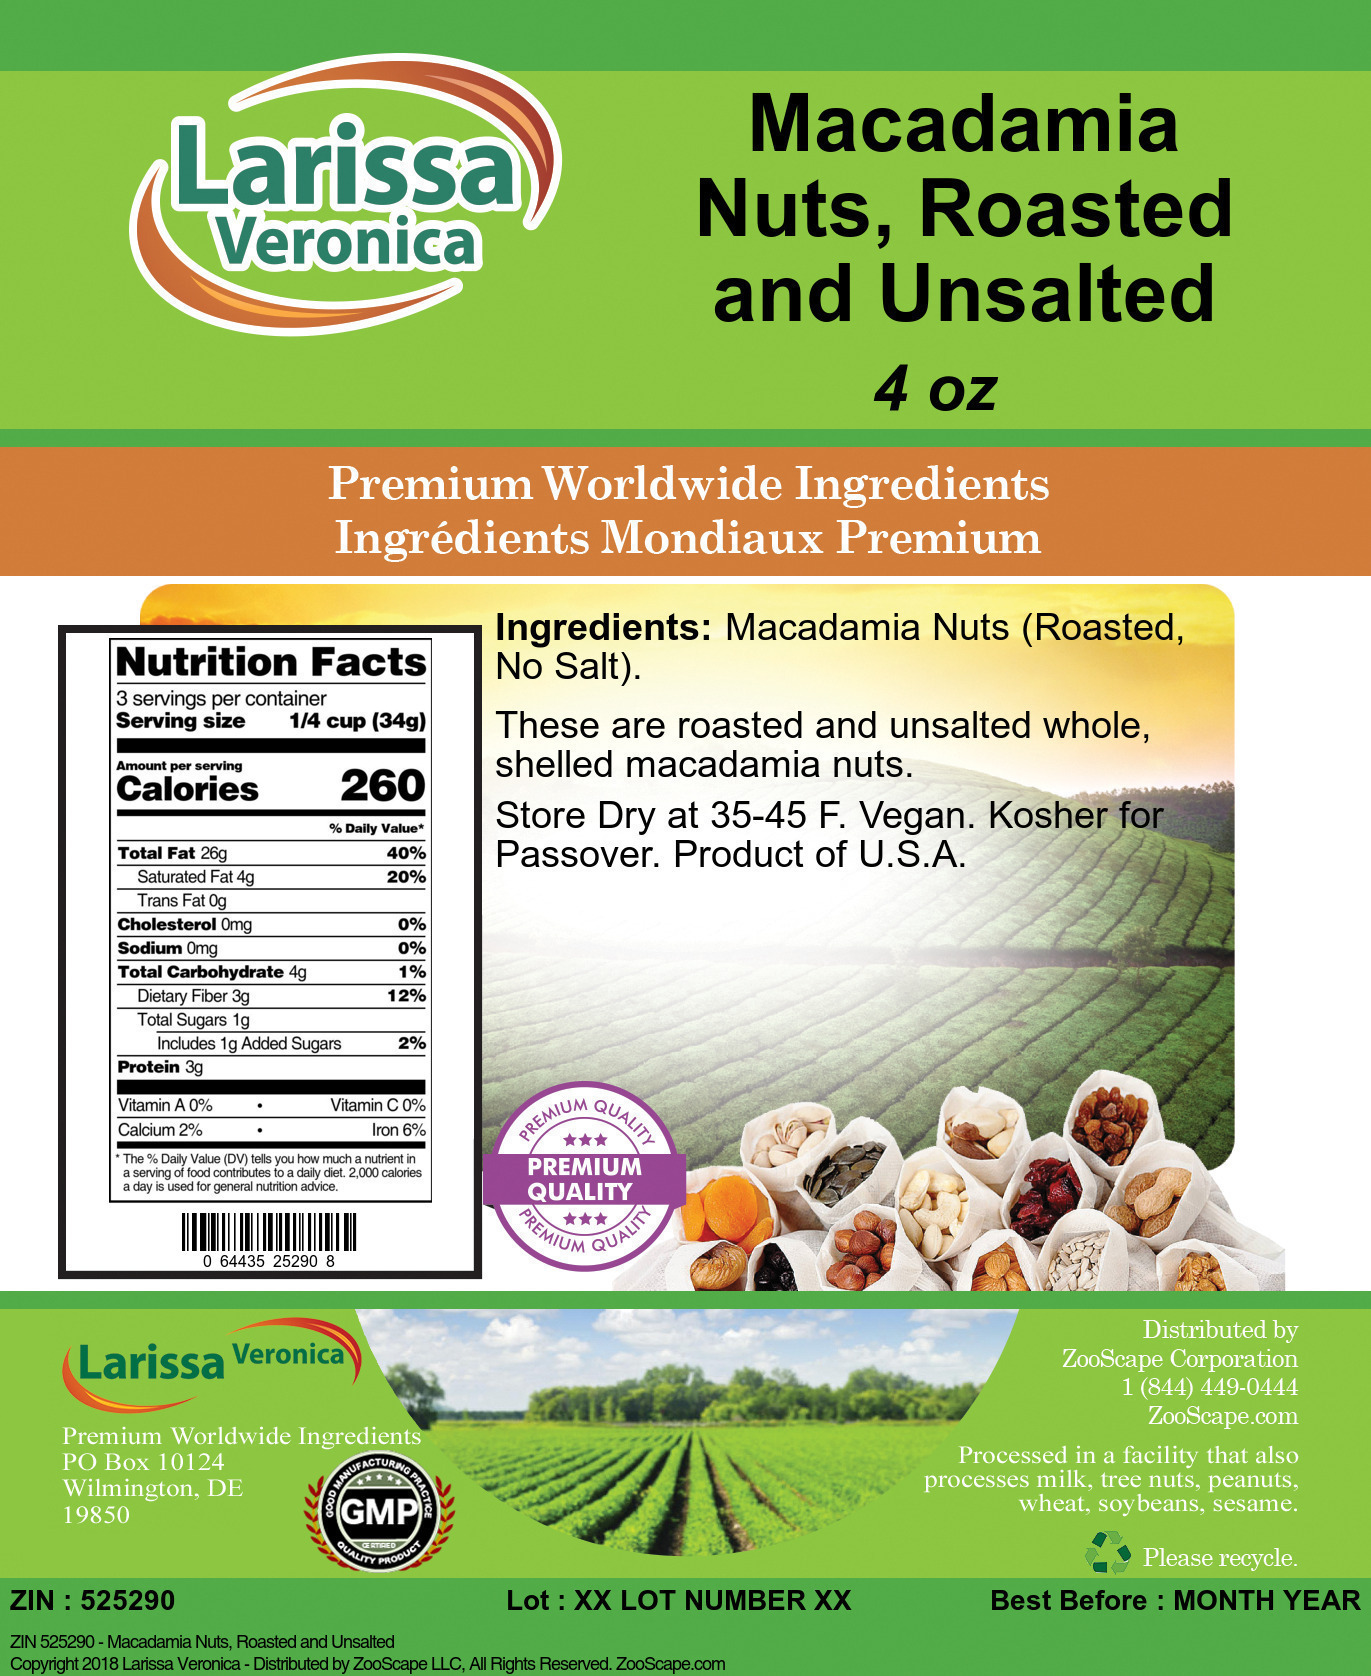 Macadamia Nuts, Roasted and Unsalted - Label